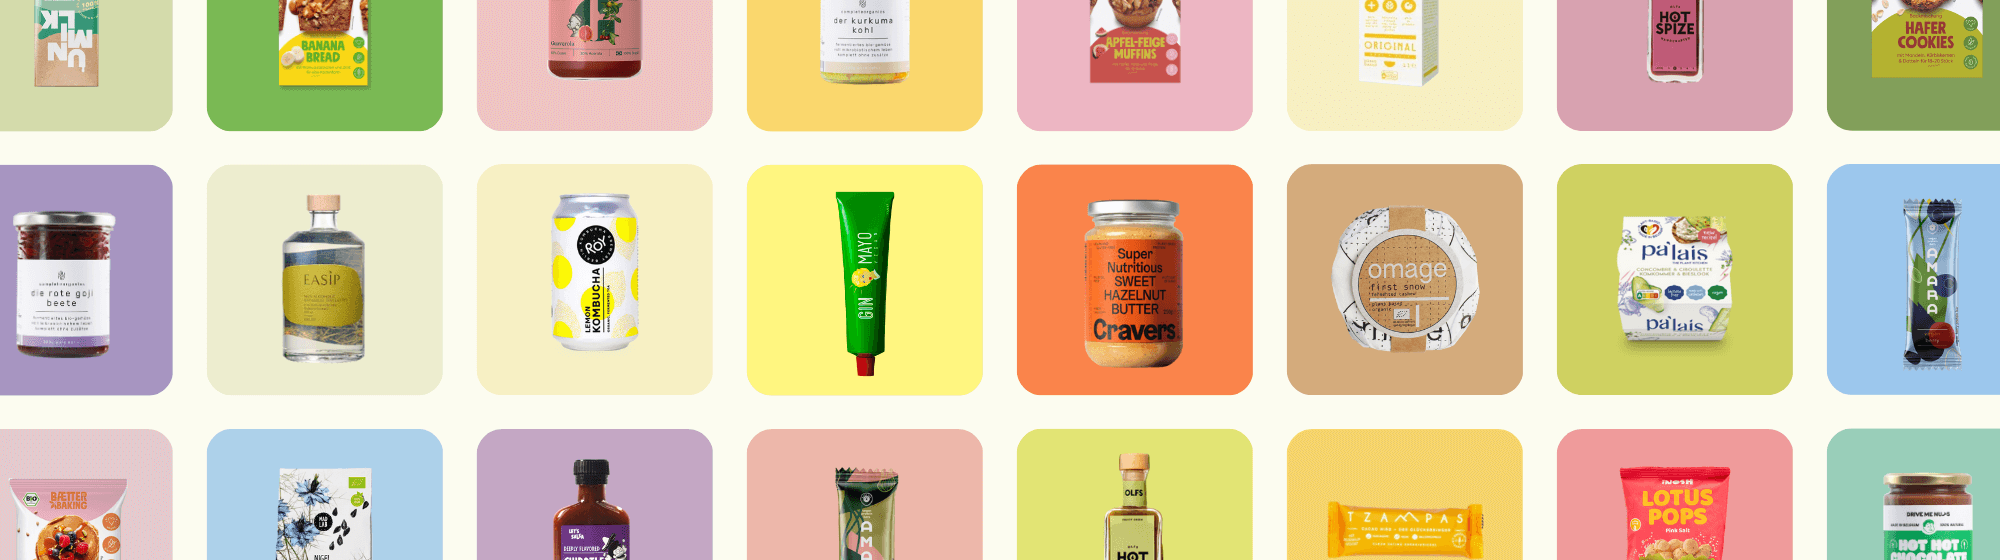 Range of vegan, plant-based food and beverage products from new, emerging brands